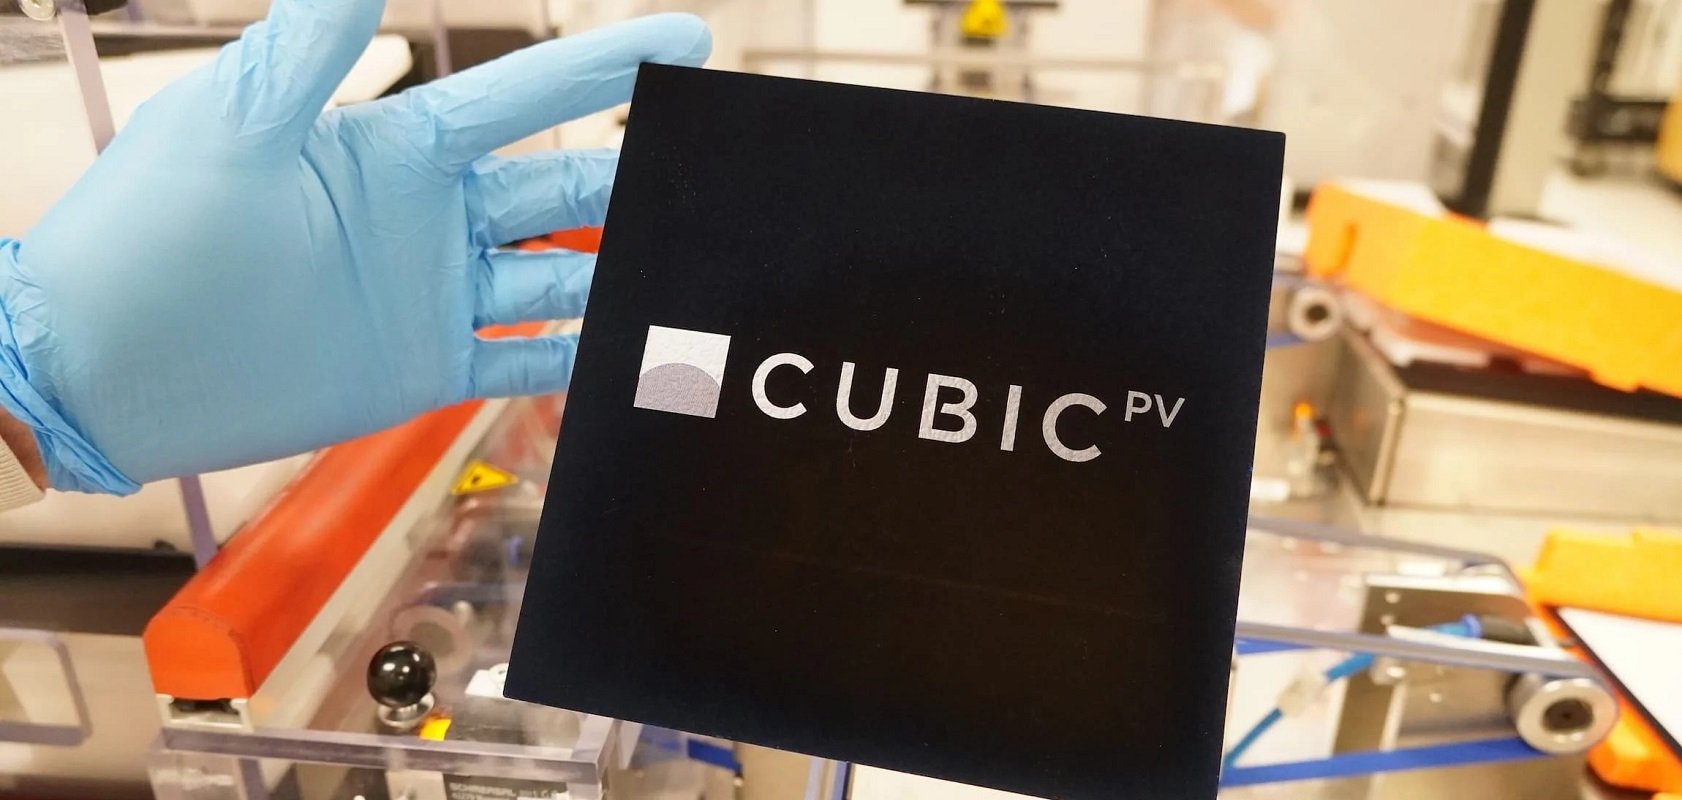 Solar Magazine - CubicPV to build 10 GW peak wafer factory in US